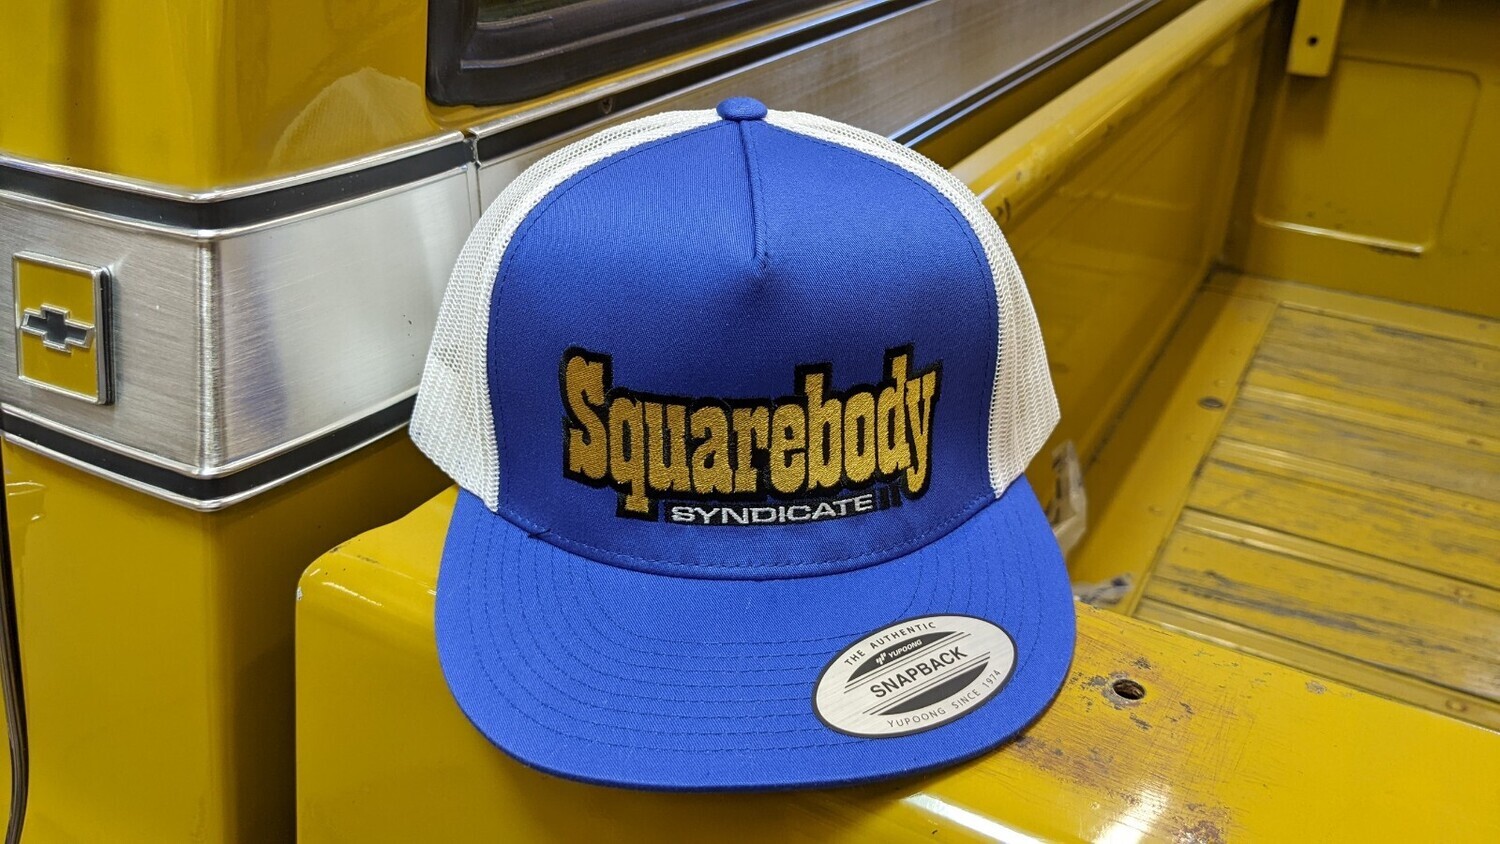 Royal Blue And White Flatbill Snapback Retro Trucker Mesh With SBS Logo #2 Hat